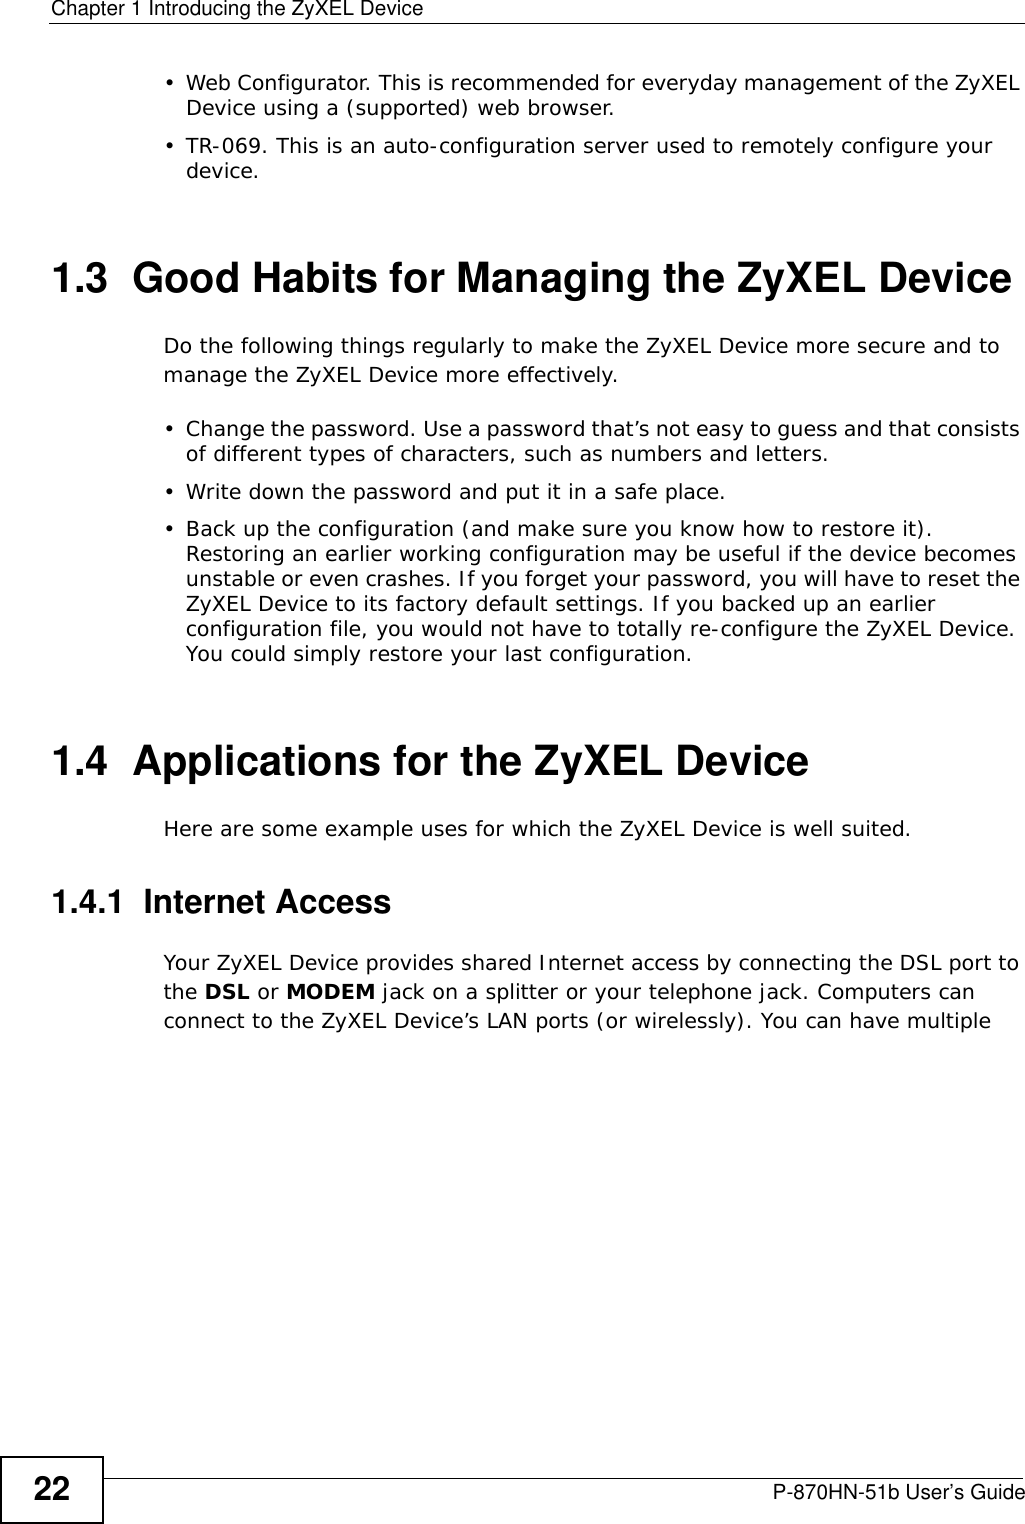 Chapter 1 Introducing the ZyXEL DeviceP-870HN-51b User’s Guide22• Web Configurator. This is recommended for everyday management of the ZyXEL Device using a (supported) web browser.• TR-069. This is an auto-configuration server used to remotely configure your device.1.3  Good Habits for Managing the ZyXEL DeviceDo the following things regularly to make the ZyXEL Device more secure and to manage the ZyXEL Device more effectively.• Change the password. Use a password that’s not easy to guess and that consists of different types of characters, such as numbers and letters.• Write down the password and put it in a safe place.• Back up the configuration (and make sure you know how to restore it). Restoring an earlier working configuration may be useful if the device becomes unstable or even crashes. If you forget your password, you will have to reset the ZyXEL Device to its factory default settings. If you backed up an earlier configuration file, you would not have to totally re-configure the ZyXEL Device. You could simply restore your last configuration.1.4  Applications for the ZyXEL DeviceHere are some example uses for which the ZyXEL Device is well suited.1.4.1  Internet AccessYour ZyXEL Device provides shared Internet access by connecting the DSL port to the DSL or MODEM jack on a splitter or your telephone jack. Computers can connect to the ZyXEL Device’s LAN ports (or wirelessly). You can have multiple 